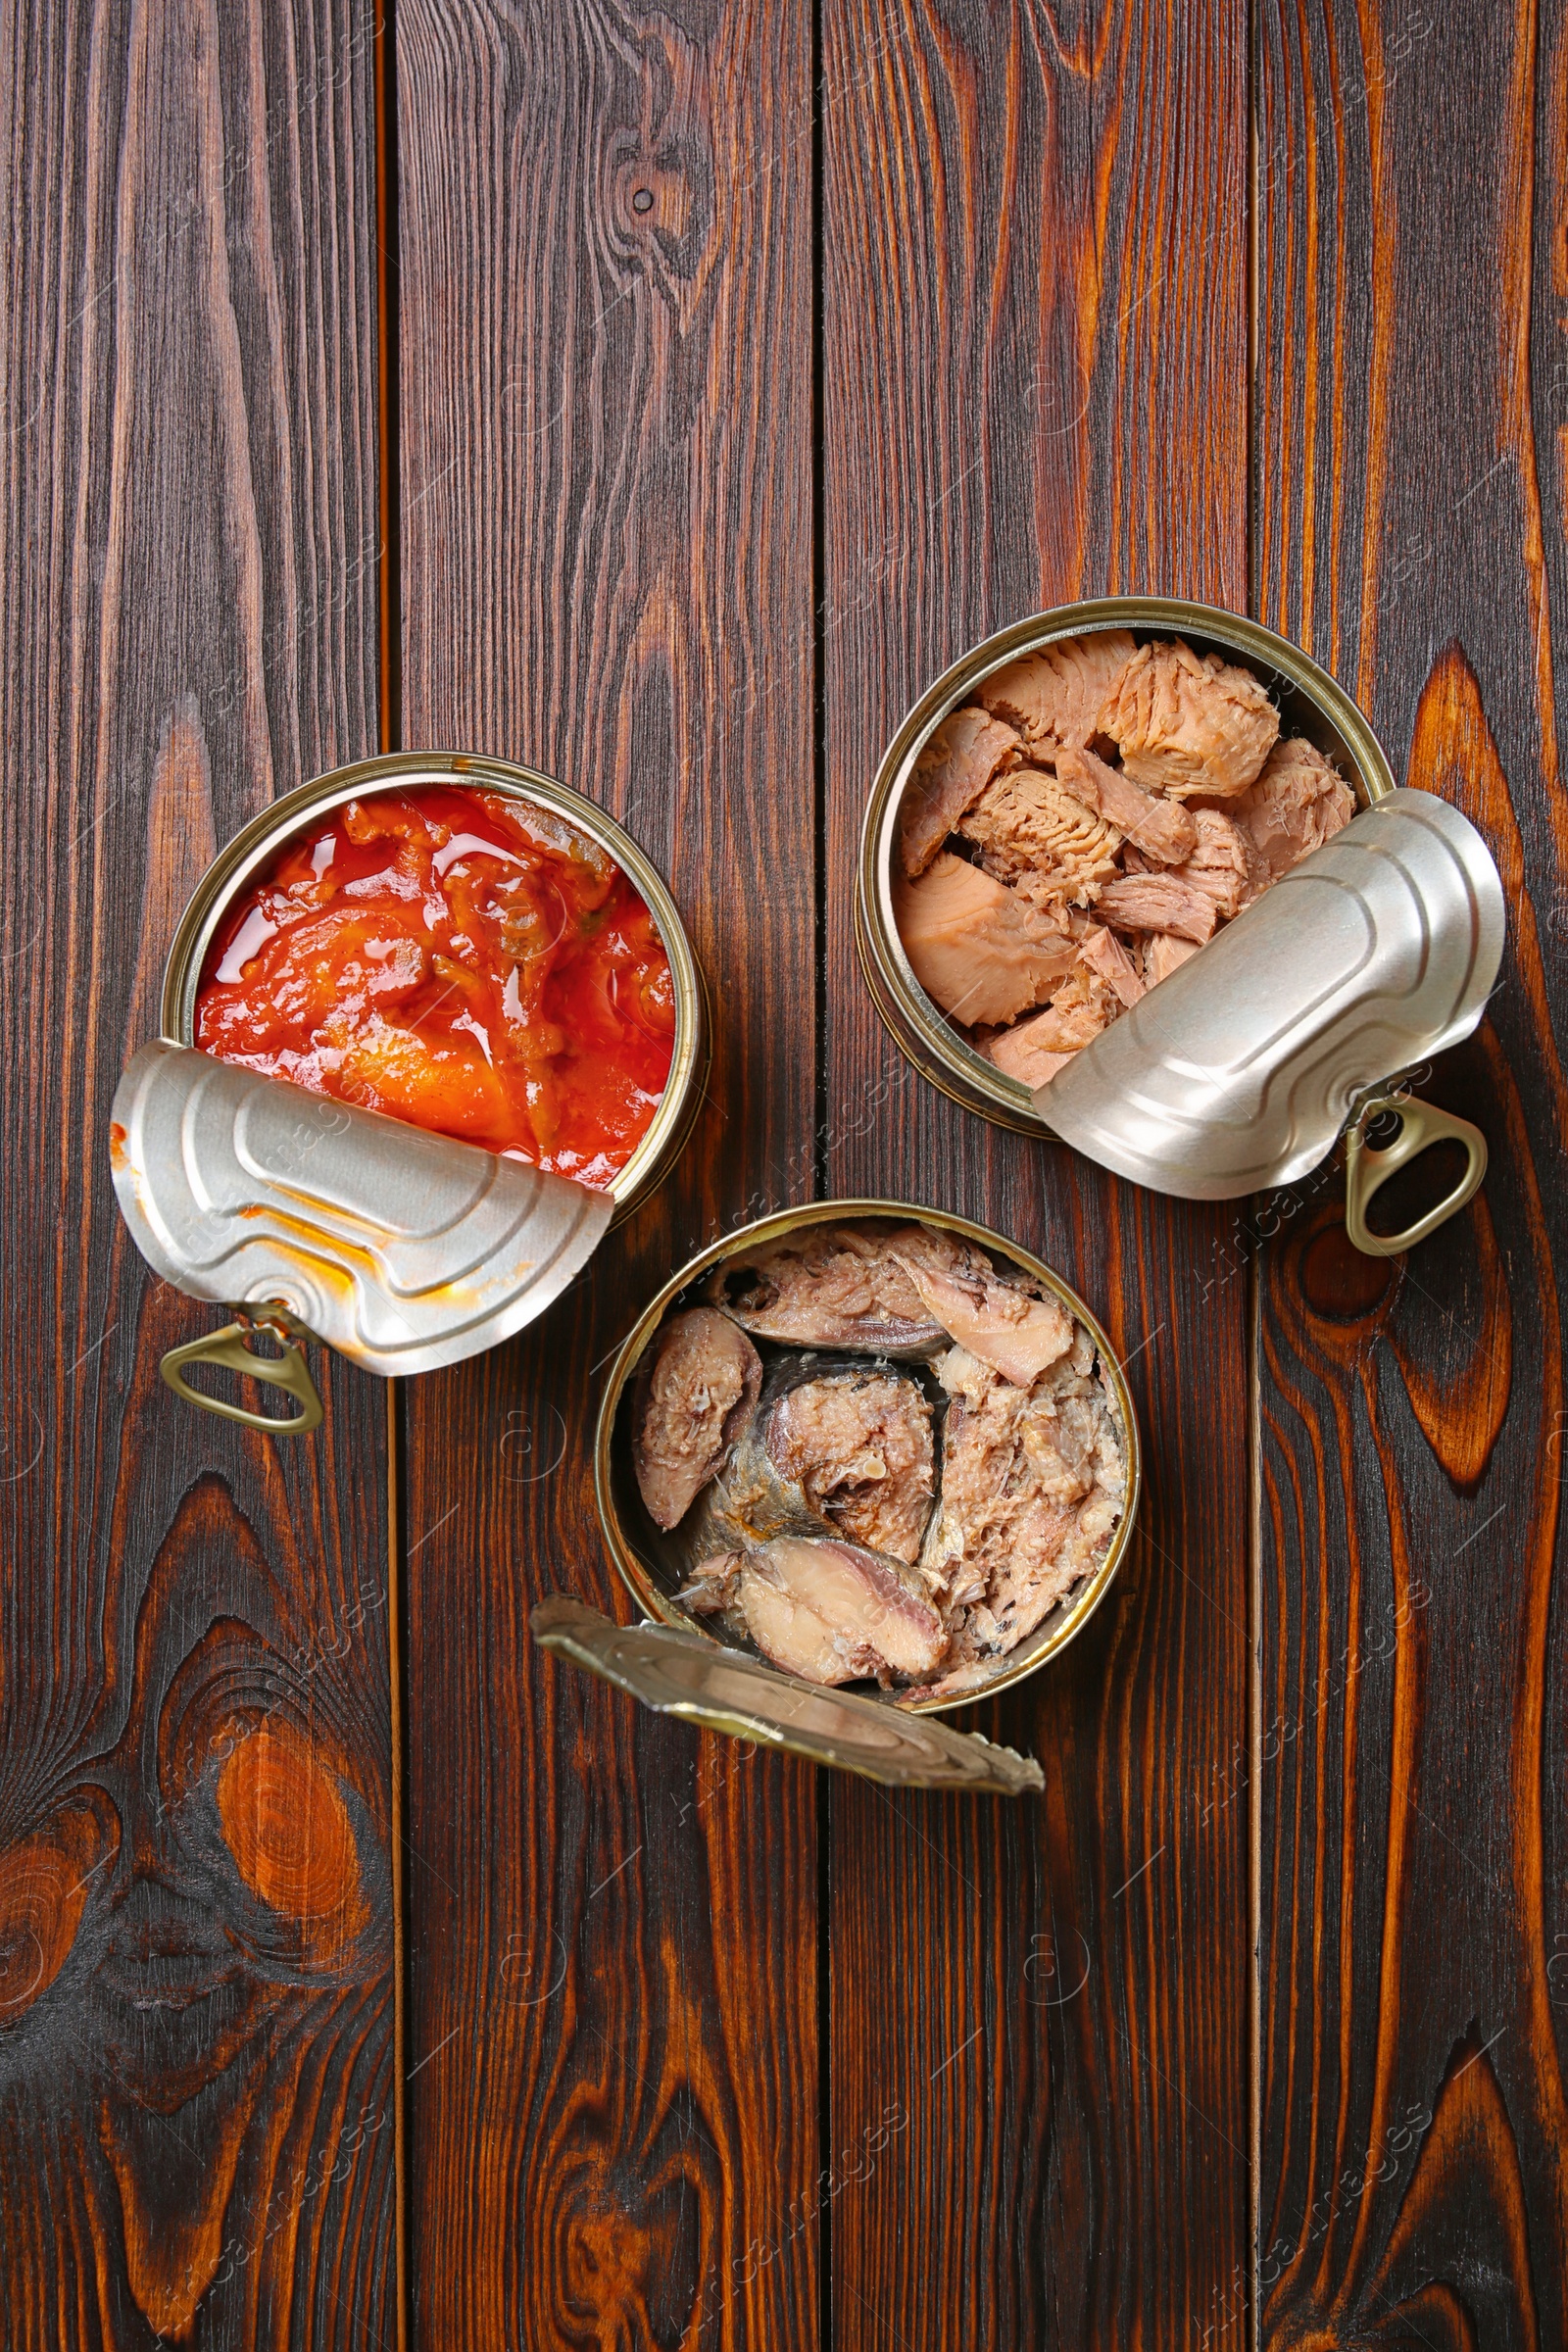 Photo of Tin cans with fish on wooden table, flat lay